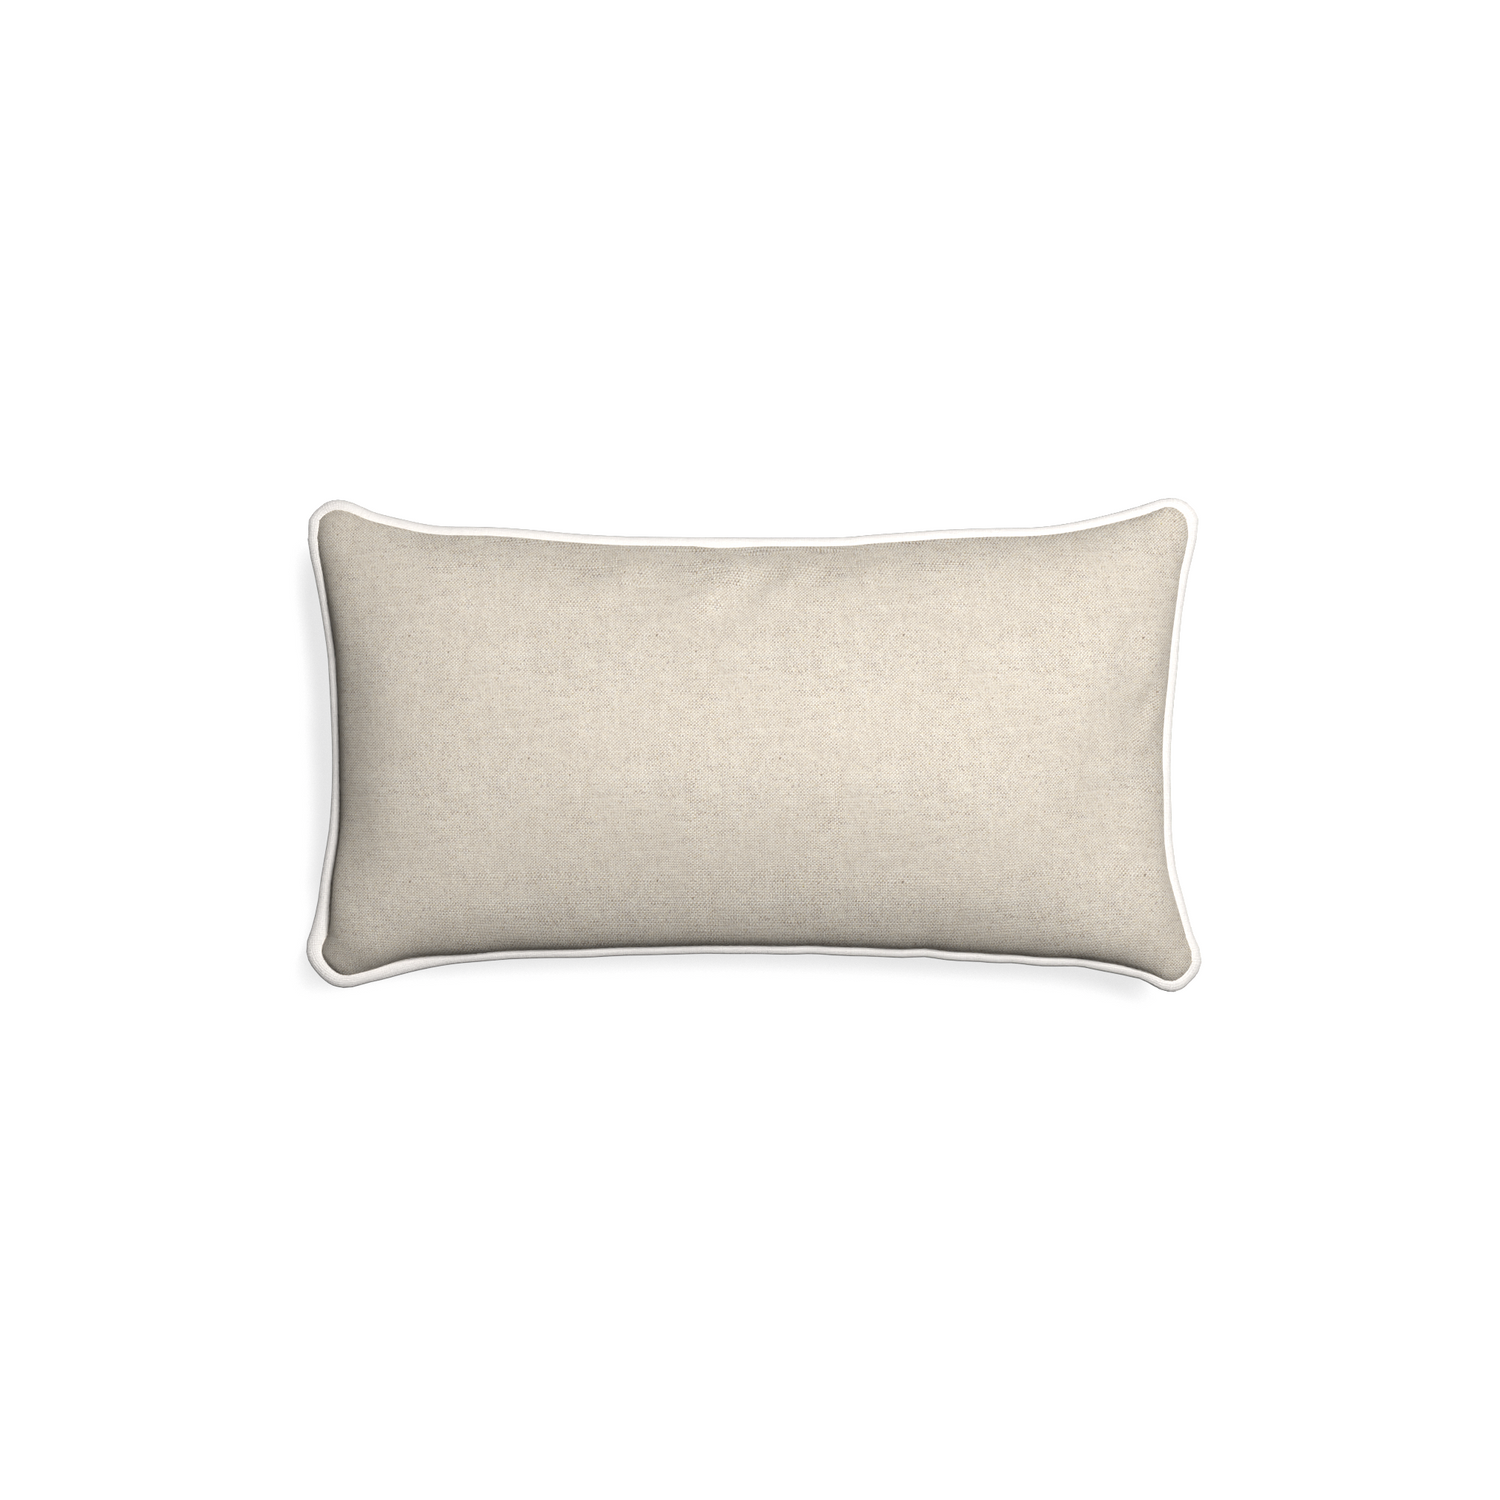 Petite-lumbar oat custom light brownpillow with snow piping on white background